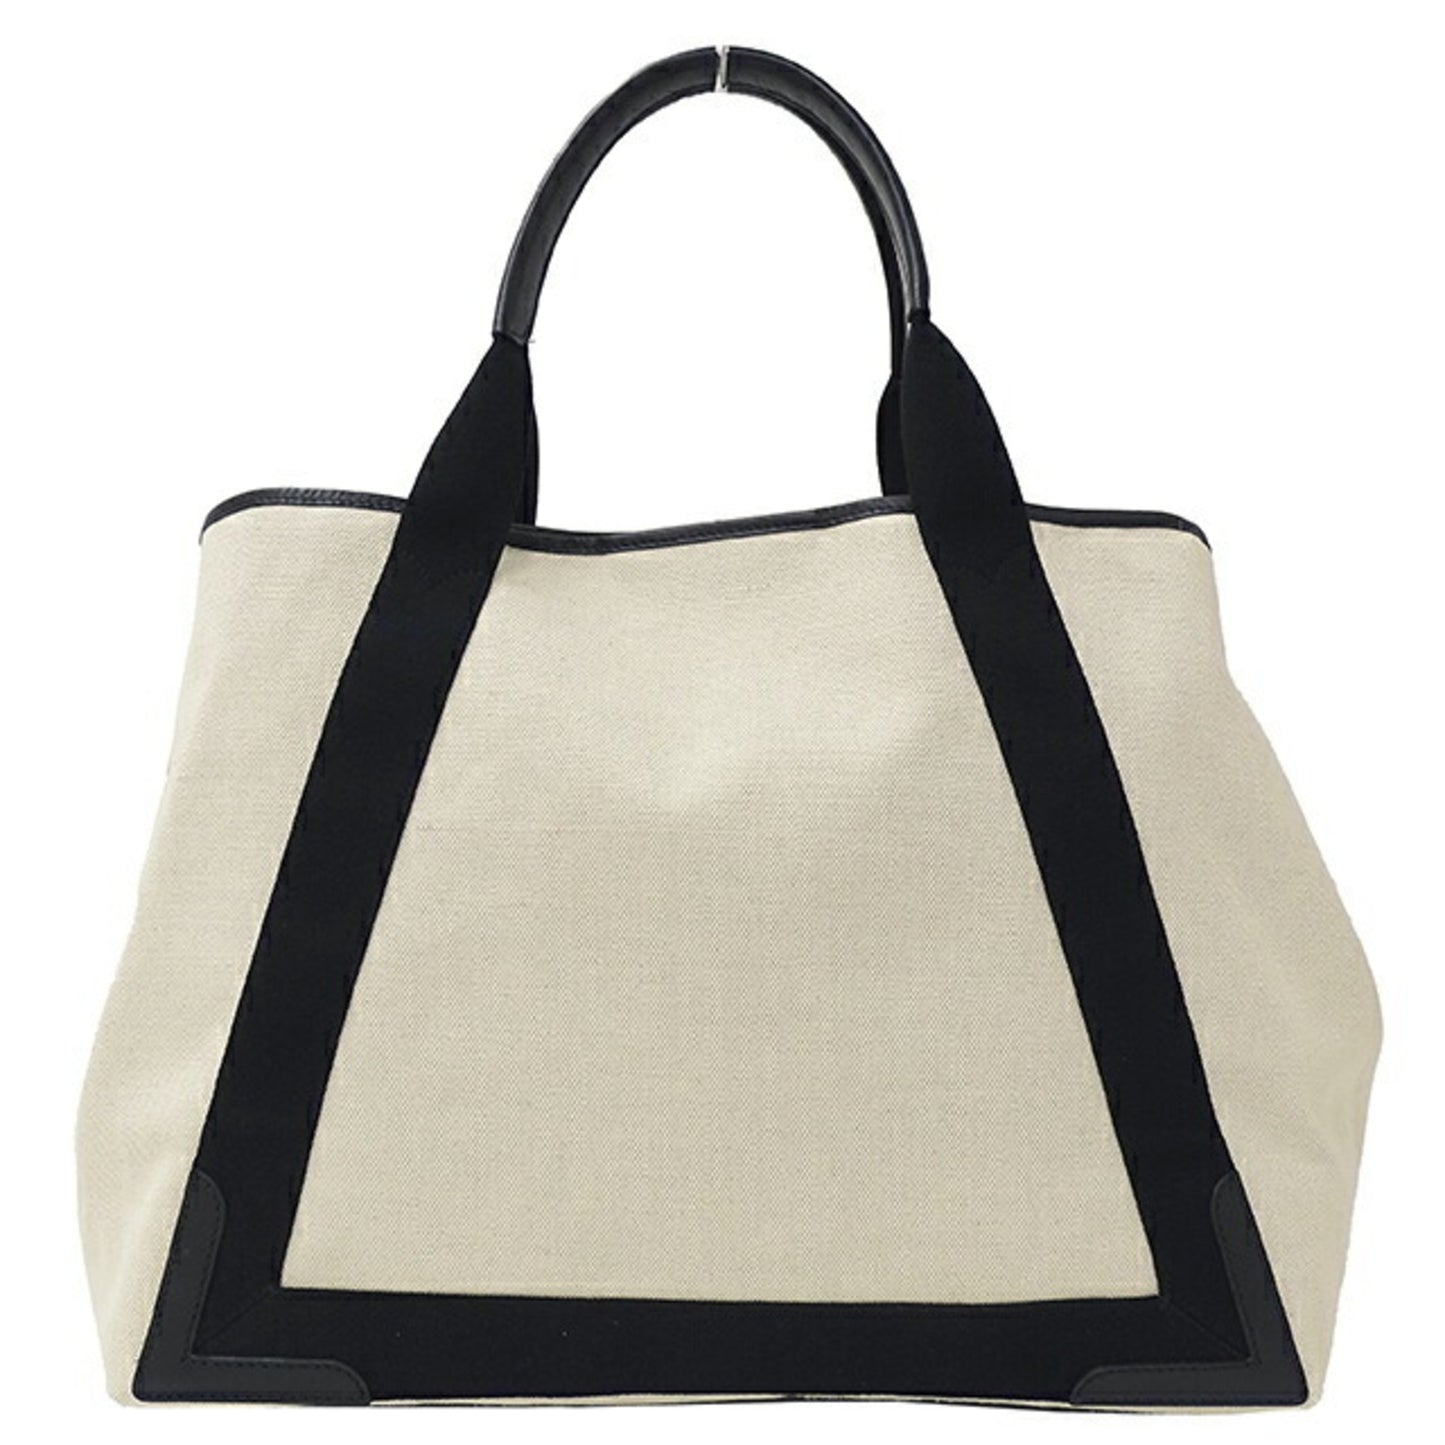 Balenciaga Women's Canvas Tote Bag with Dust Bag and Pouch in Beige